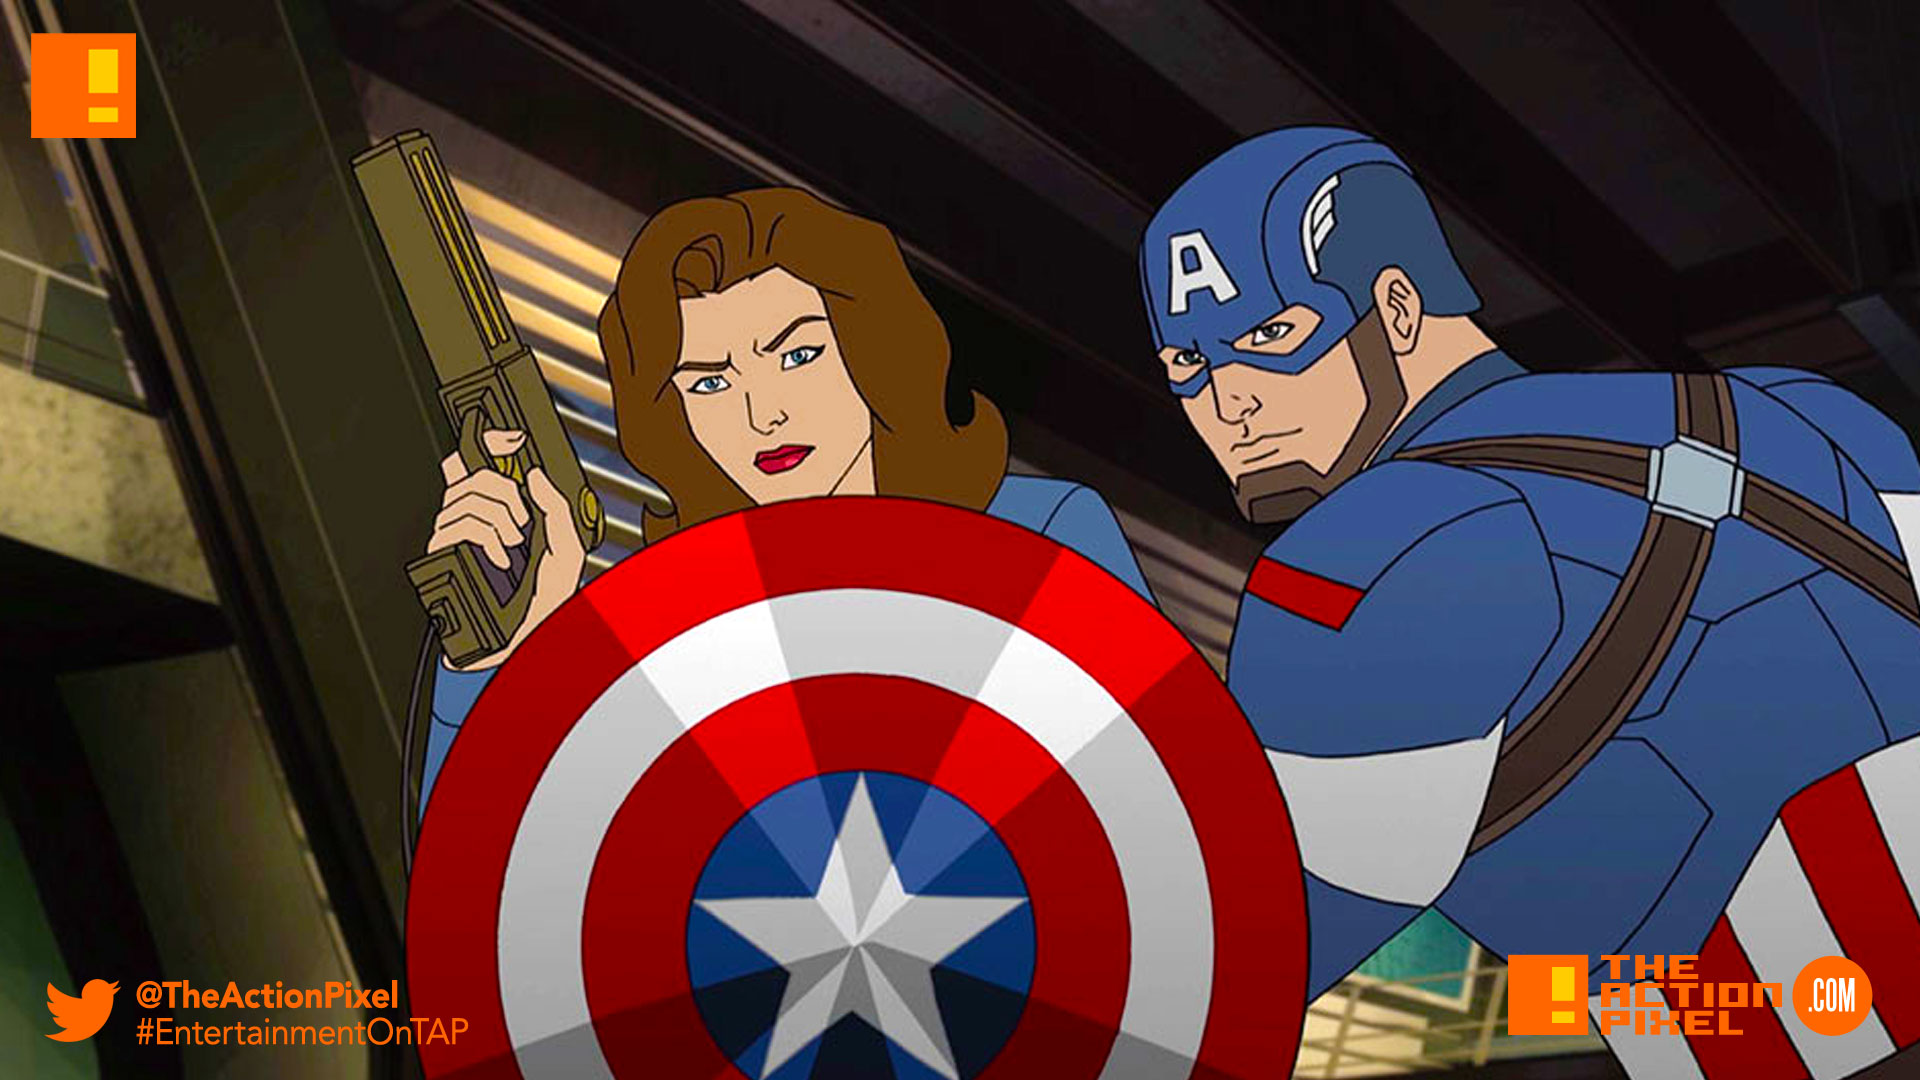 Marvel's Avengers: Secret Wars” clip brings Hayley Atwell's Peggy Carter  back to the Marvel-verse – The Action Pixel